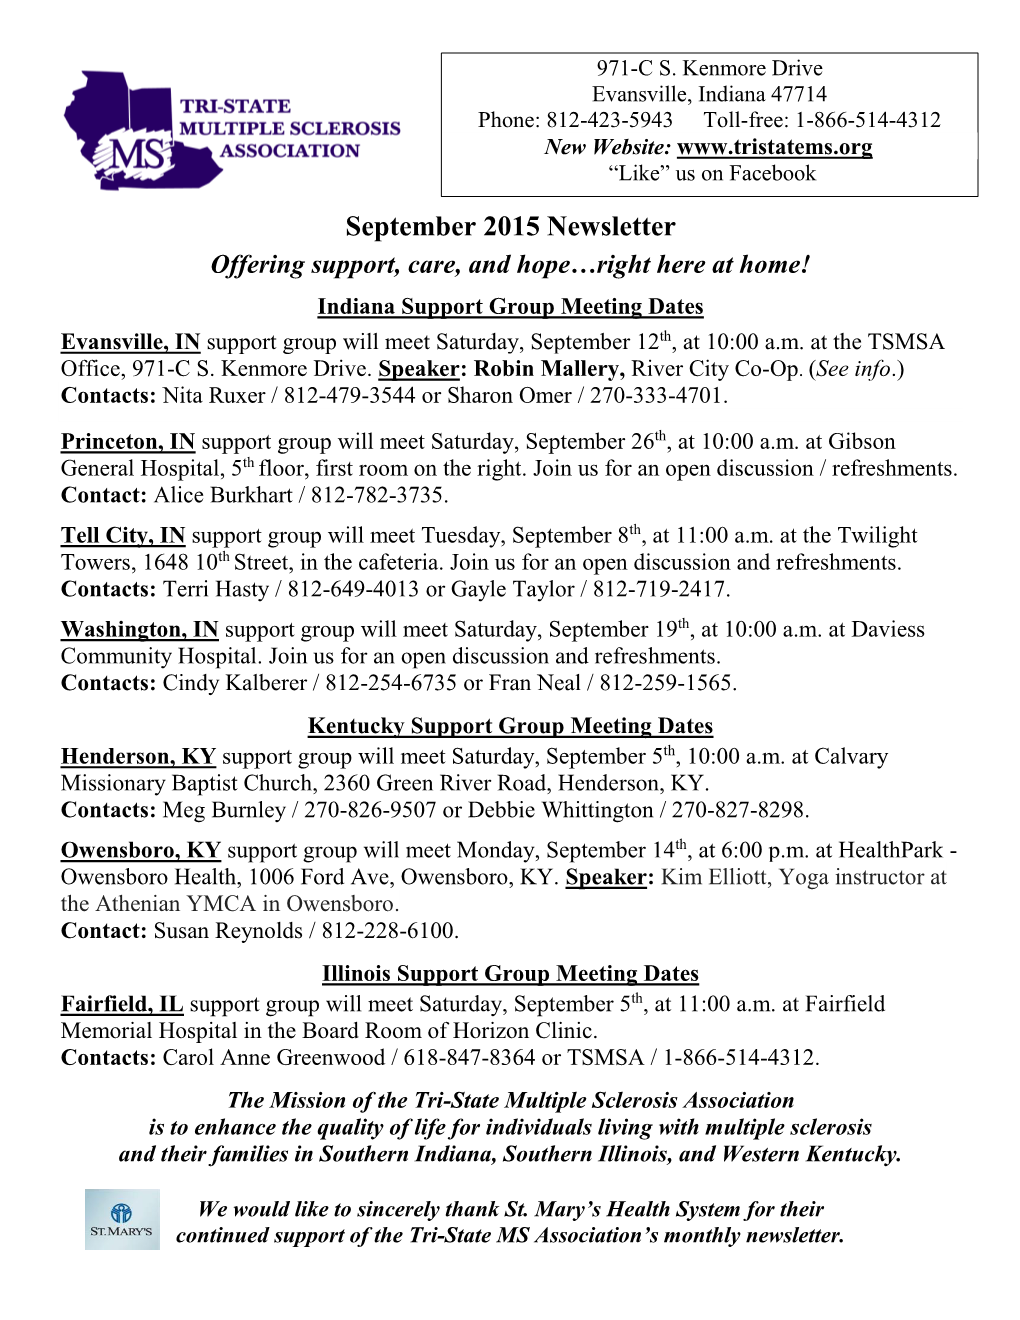 September 2015 Newsletter Offering Support, Care, and Hope…Right Here at Home! Indiana Support Group Meeting Dates